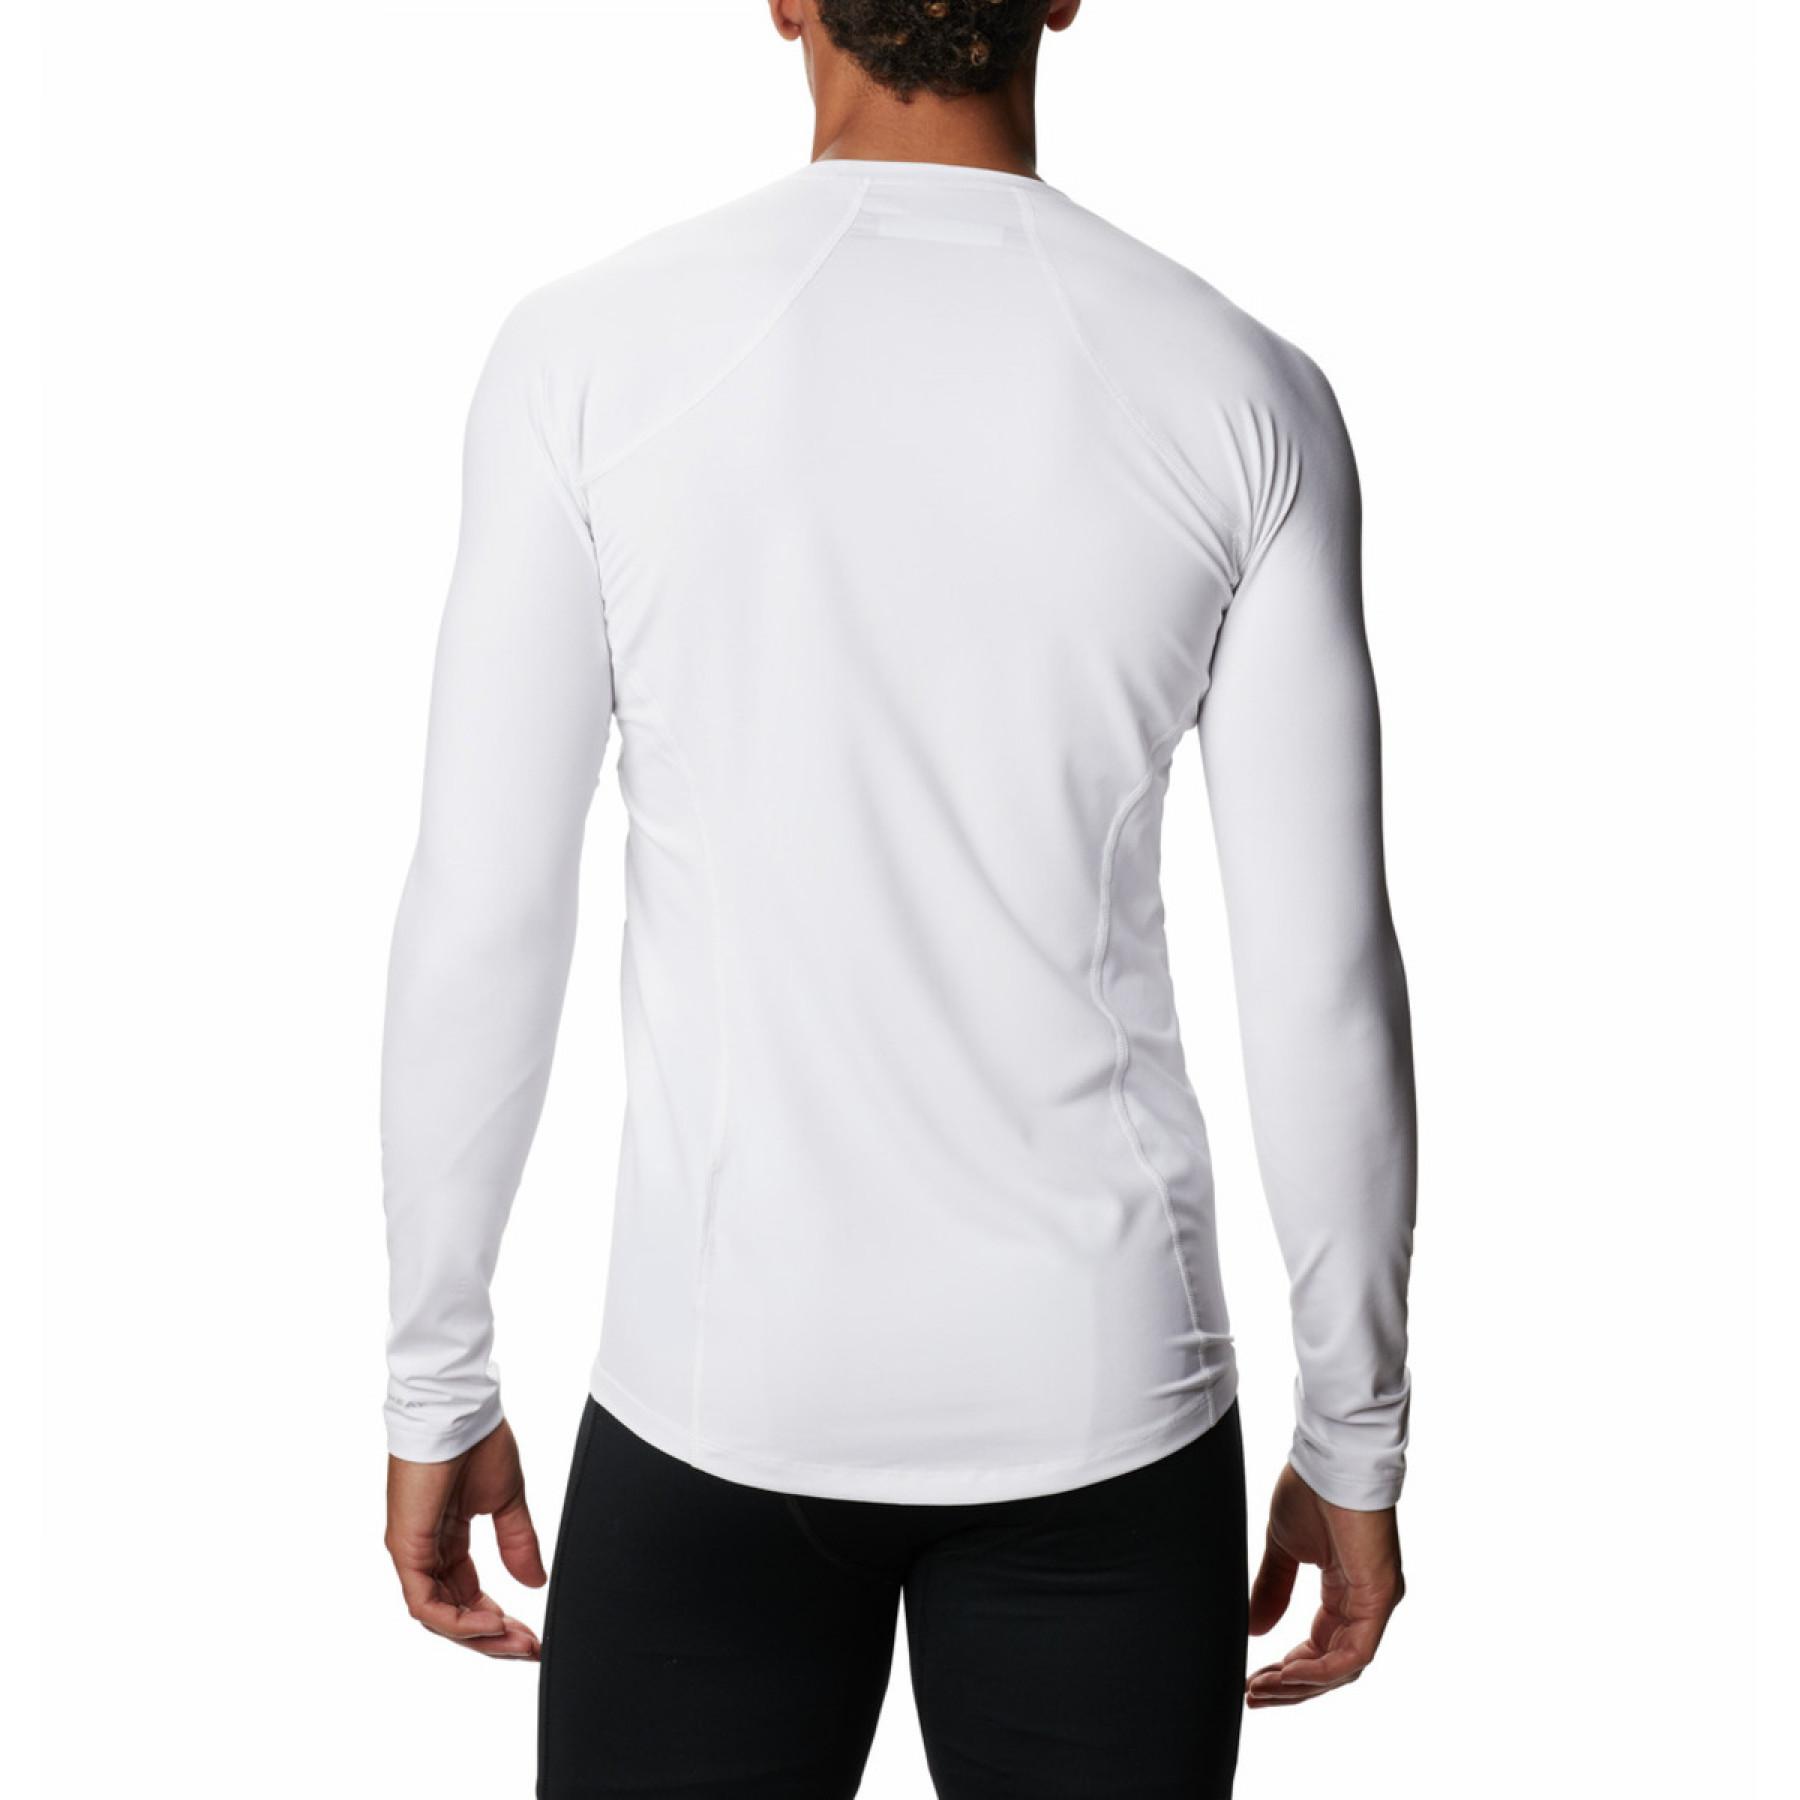 Long sleeve compression top Columbia Midweight Stretch